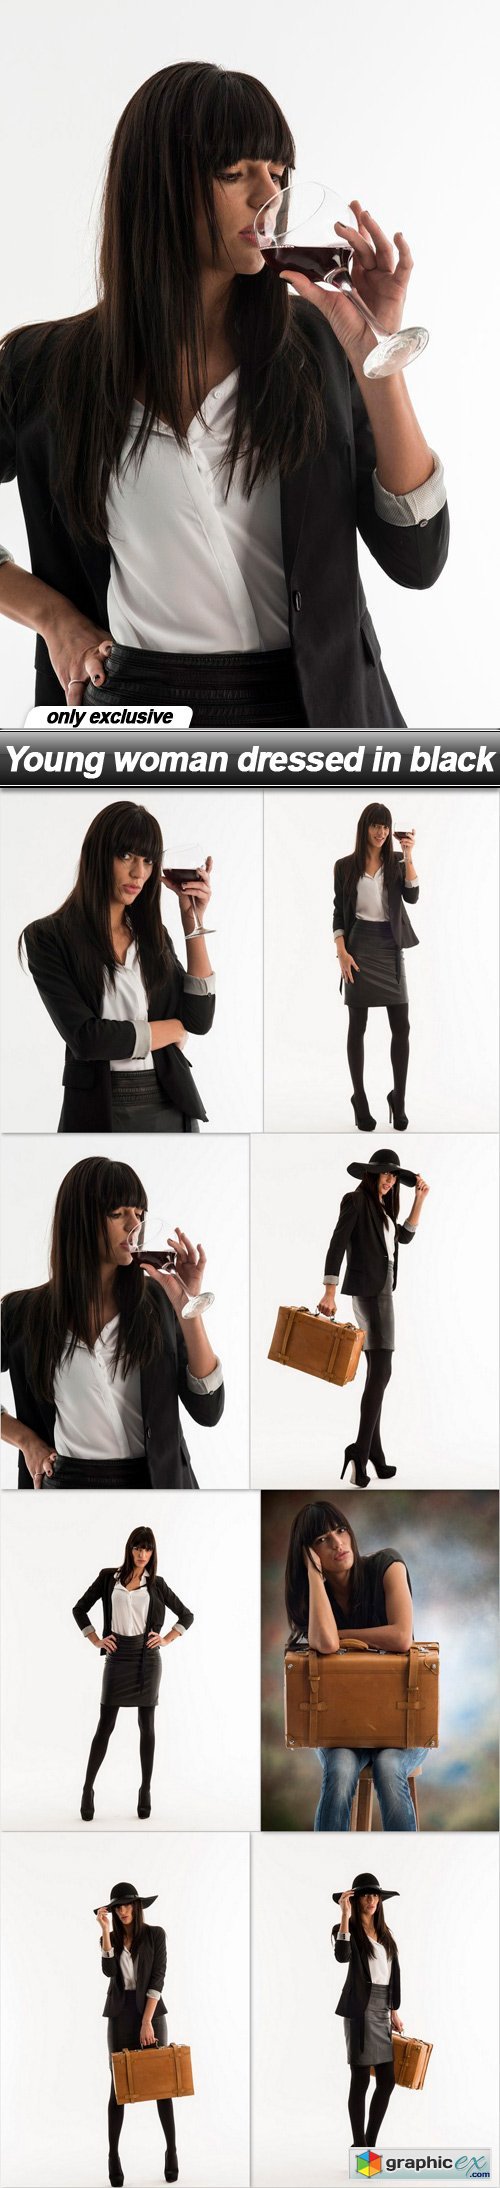 Young woman dressed in black - 8 UHQ JPEG